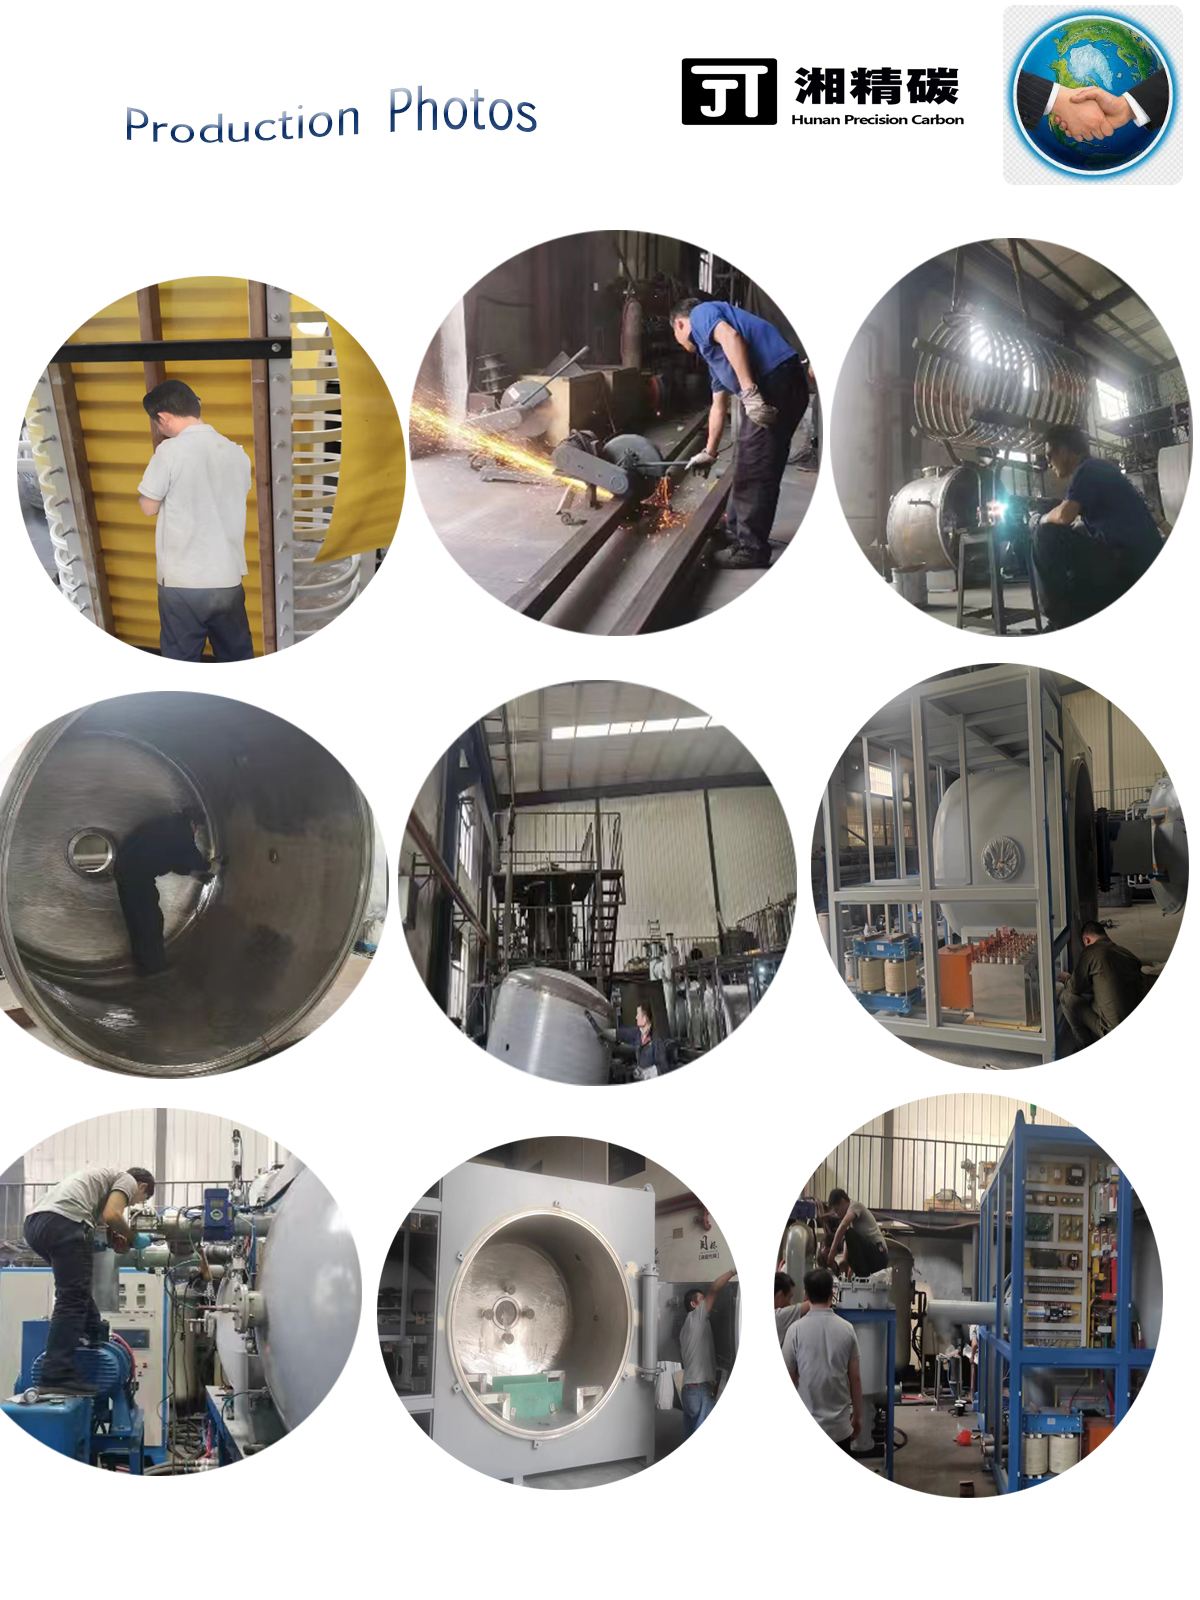 3000 degree Thermal Conductive Film Graphitization furnace for Graphite Film and Graphene,induction heating furnace